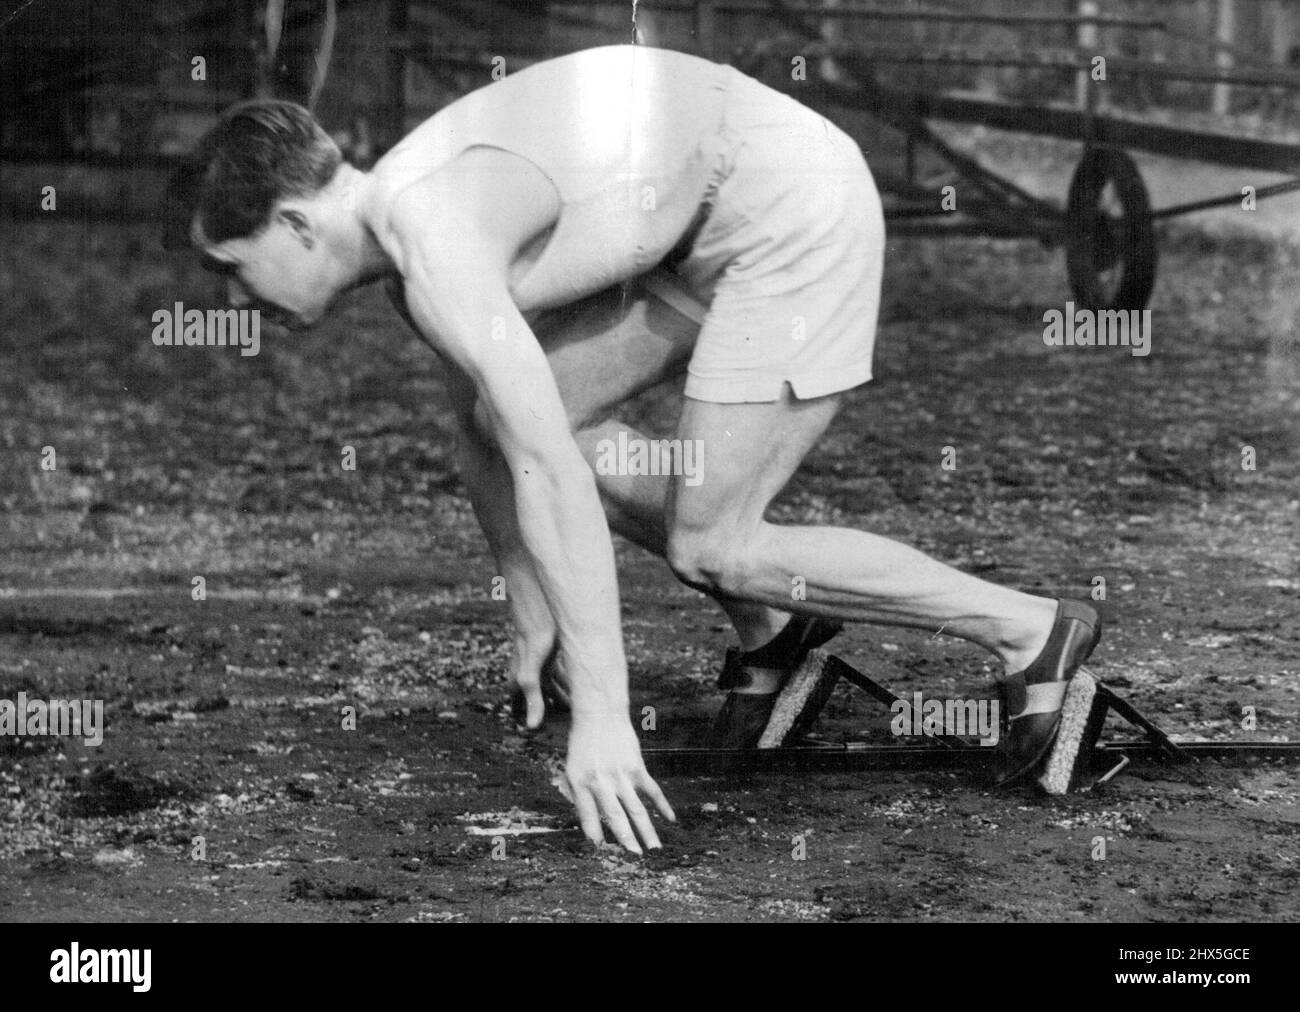 Starting Blocks For Varsity Athletes. T.D. Anderson, Cambridge University hurdler, gets off to a flying starts running training at Fenner's ground, Cambridge, with the new blocks. A new type of starting apparatus, obviating the necessity of 'digging in 1, will be used by Oxford and Cambridge University athletes at their meeting at the White City on Saturday, The Cambridge team are already using it in their training for the event. March 20, 1947. (Photo by Fox Photos). Stock Photo